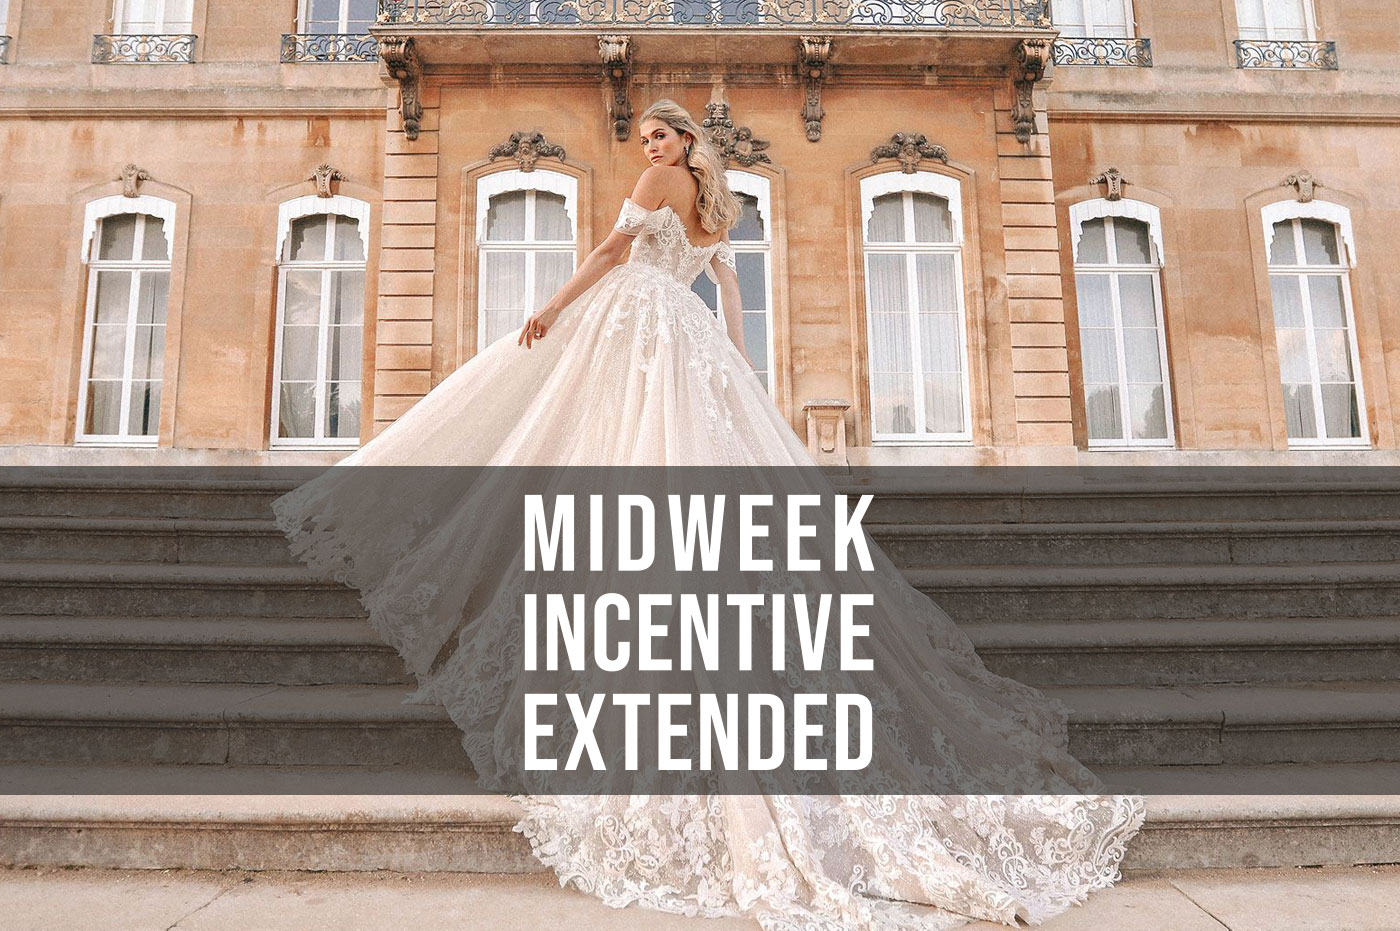 Midweek Incentive Extended